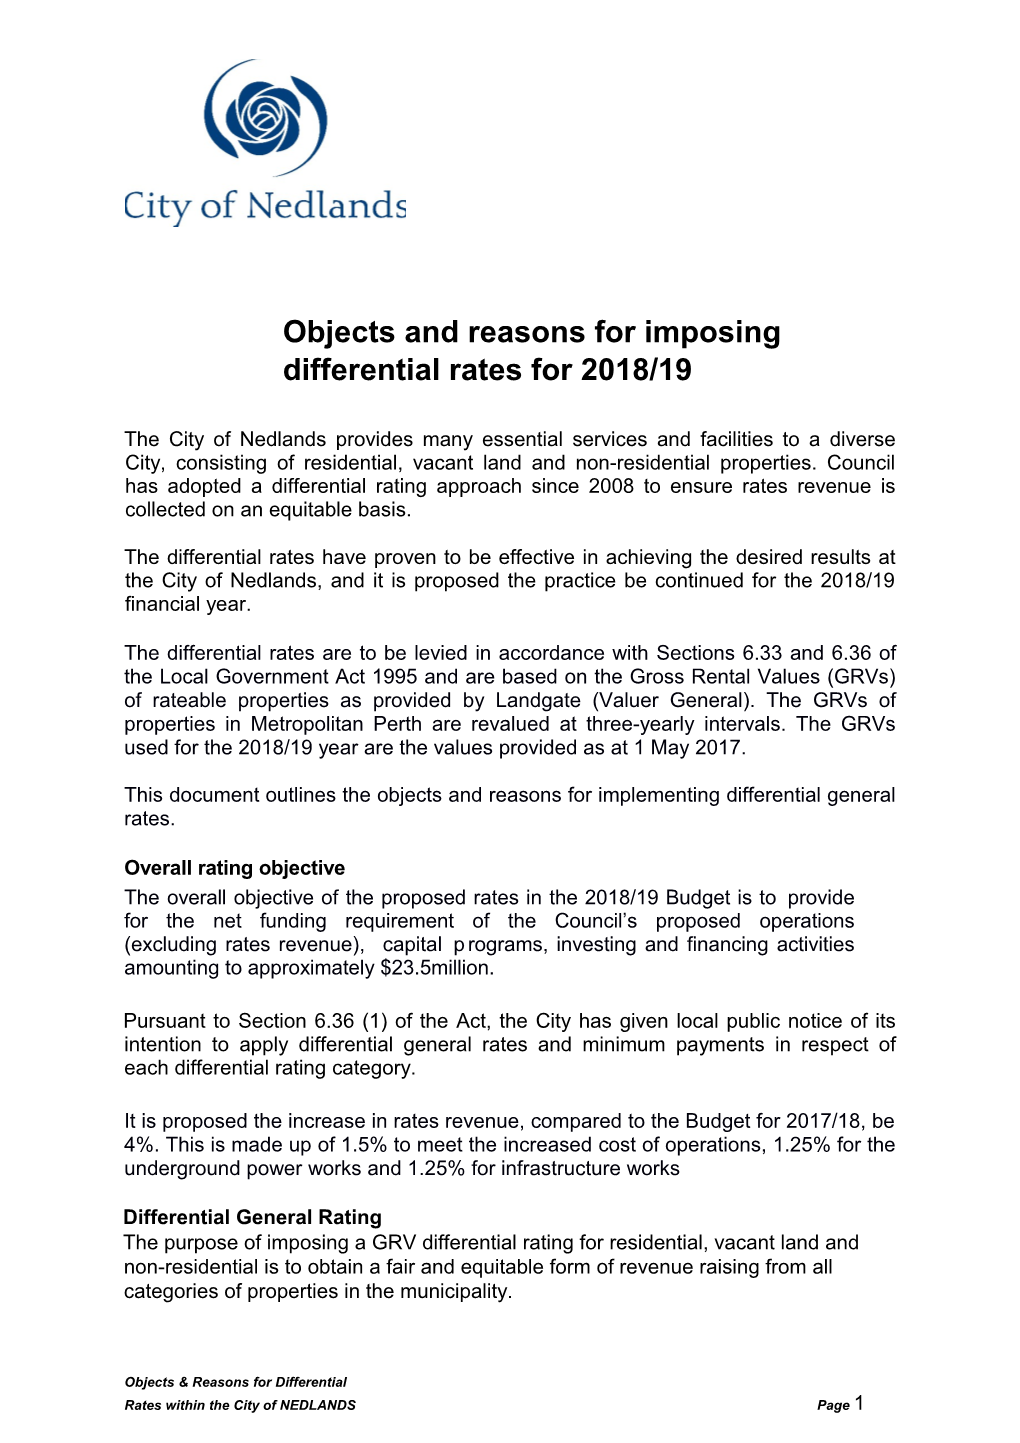 Objects and Reasons for Differential Rates 2017 18